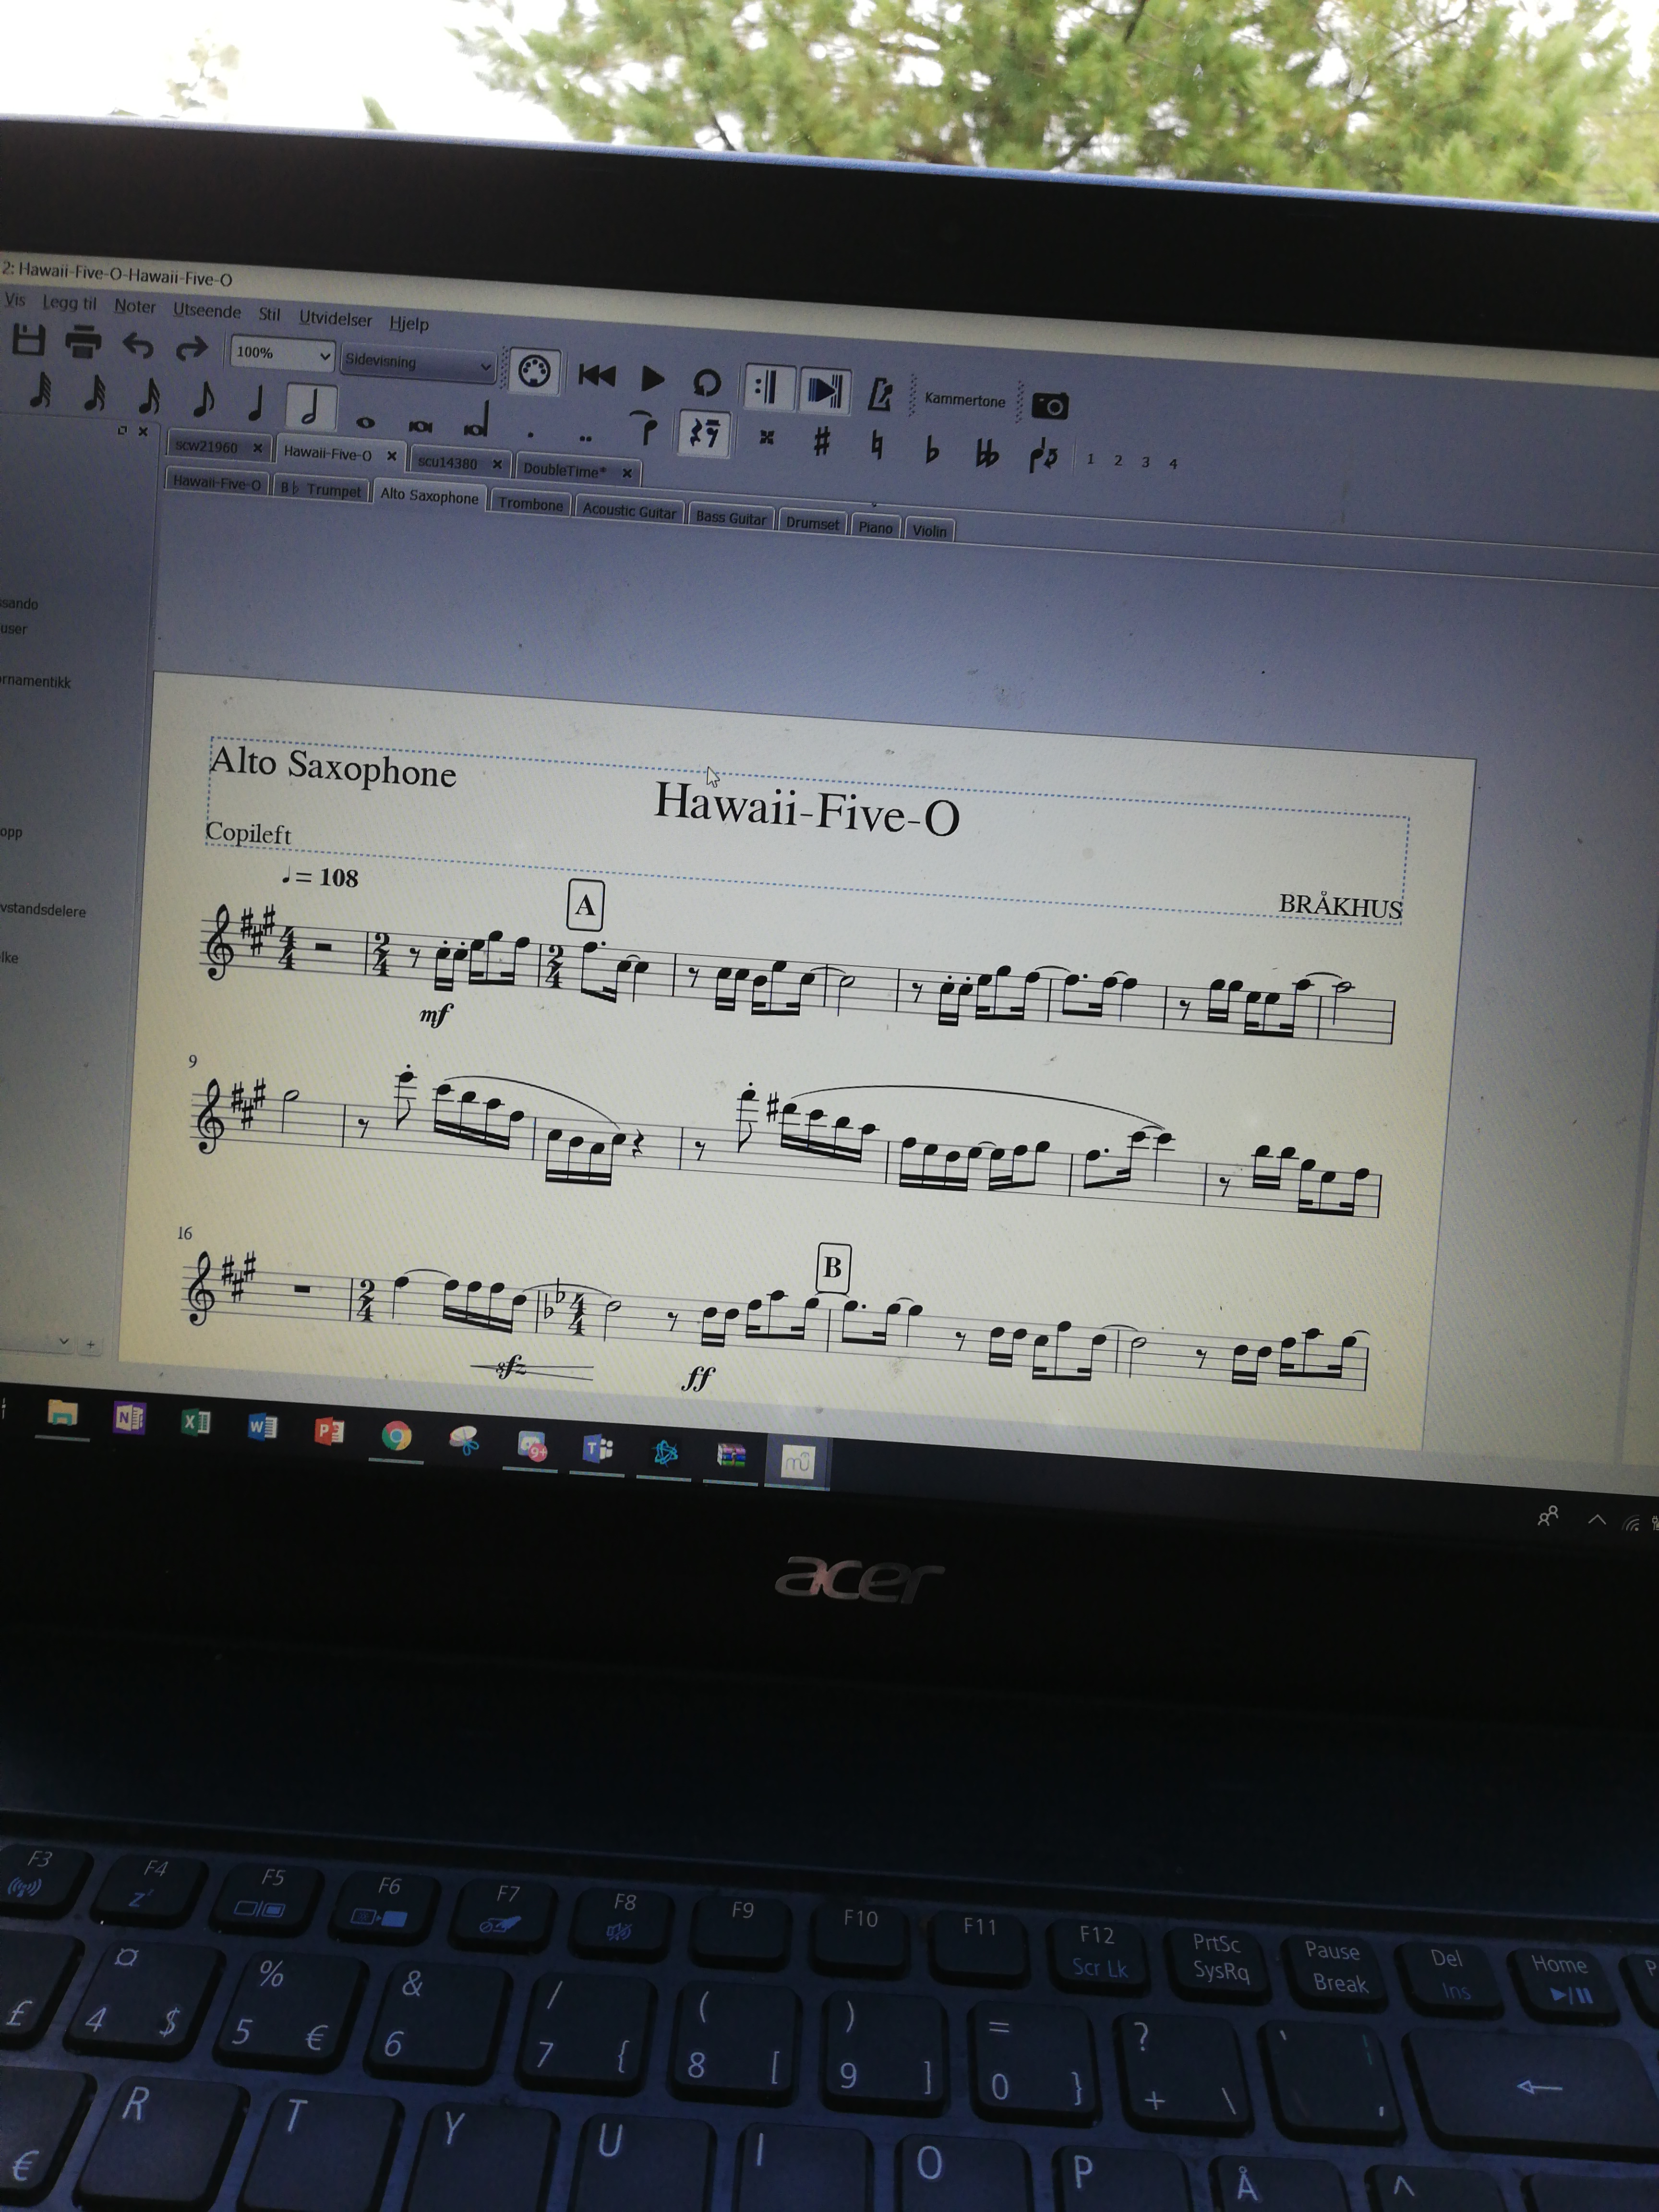 MuseScore 4.1.1 for android download